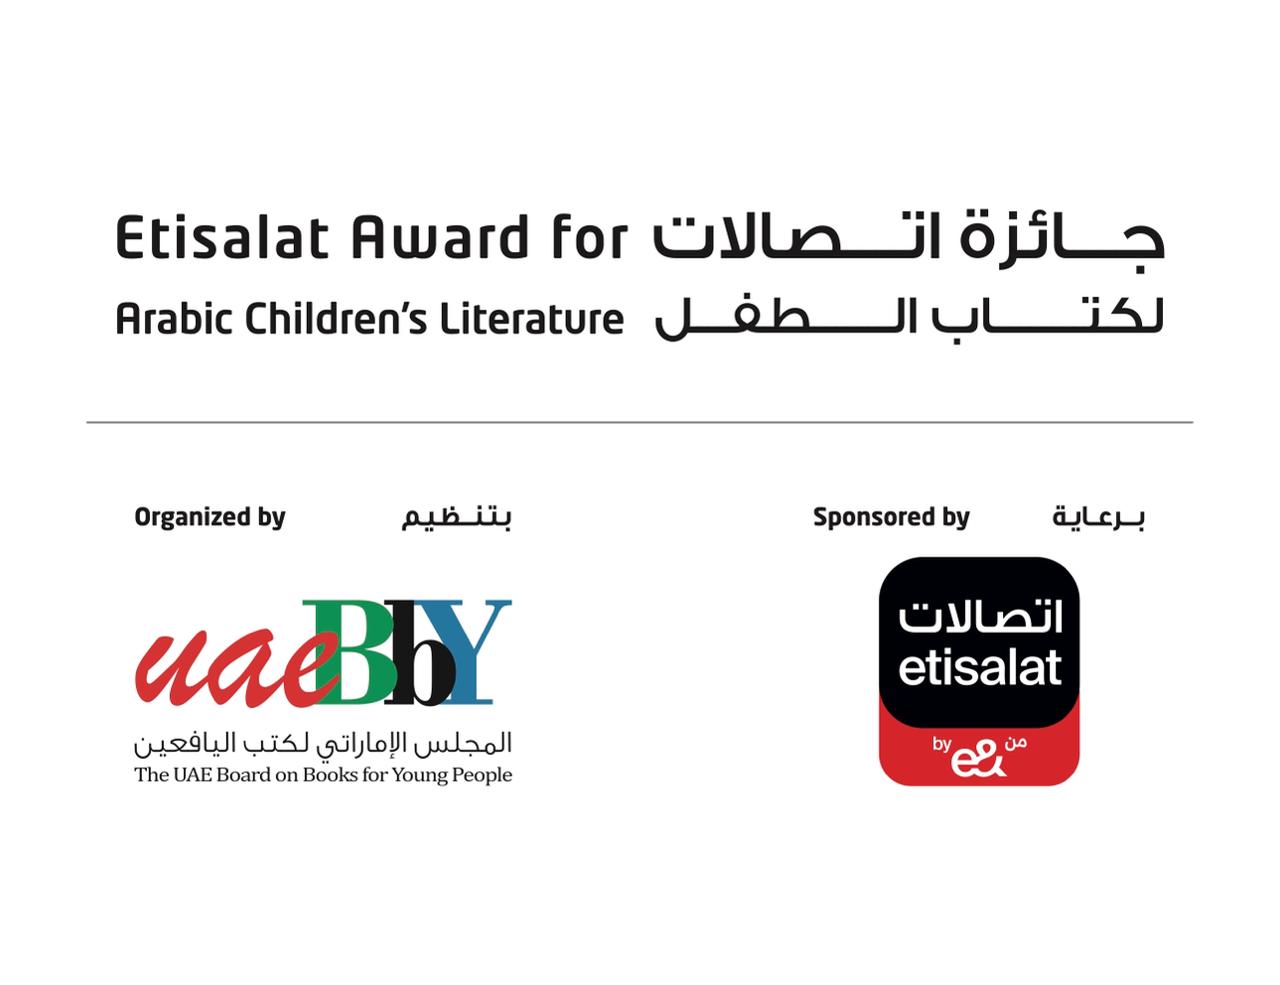 etisalat award for arabic children's literature opens entries for its 16th edition